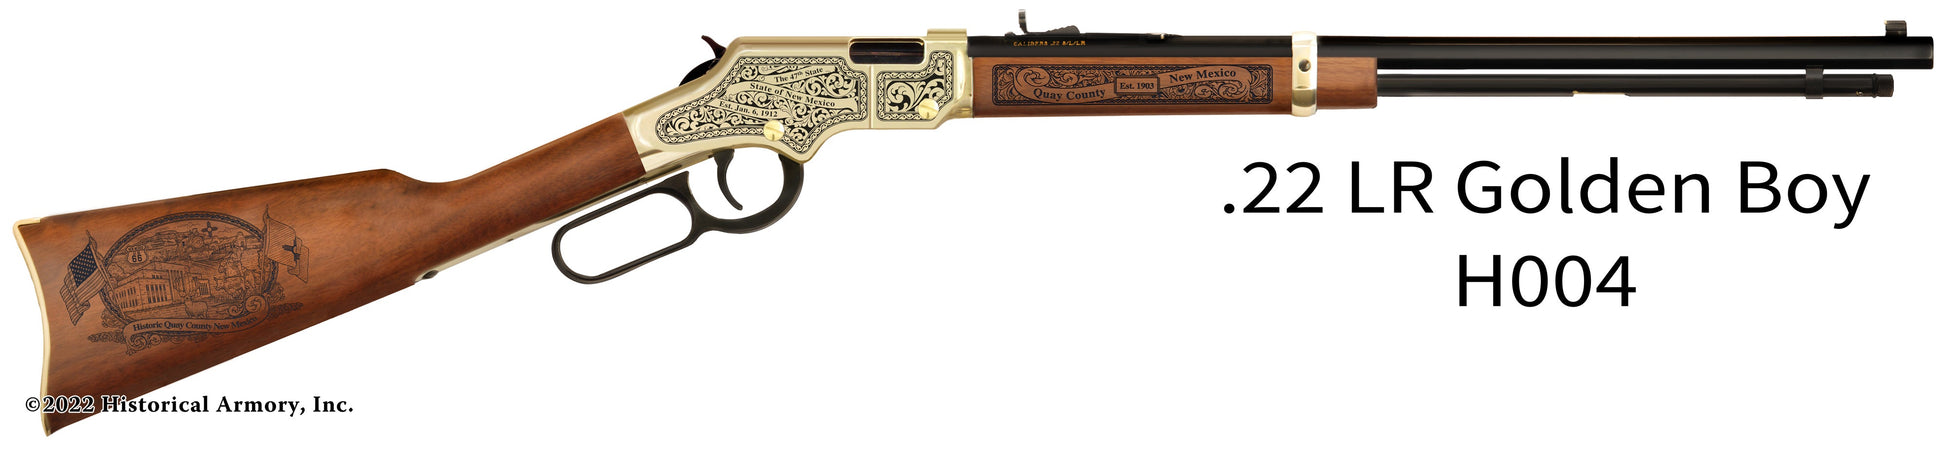 Quay County New Mexico Engraved Henry Golden Boy Rifle